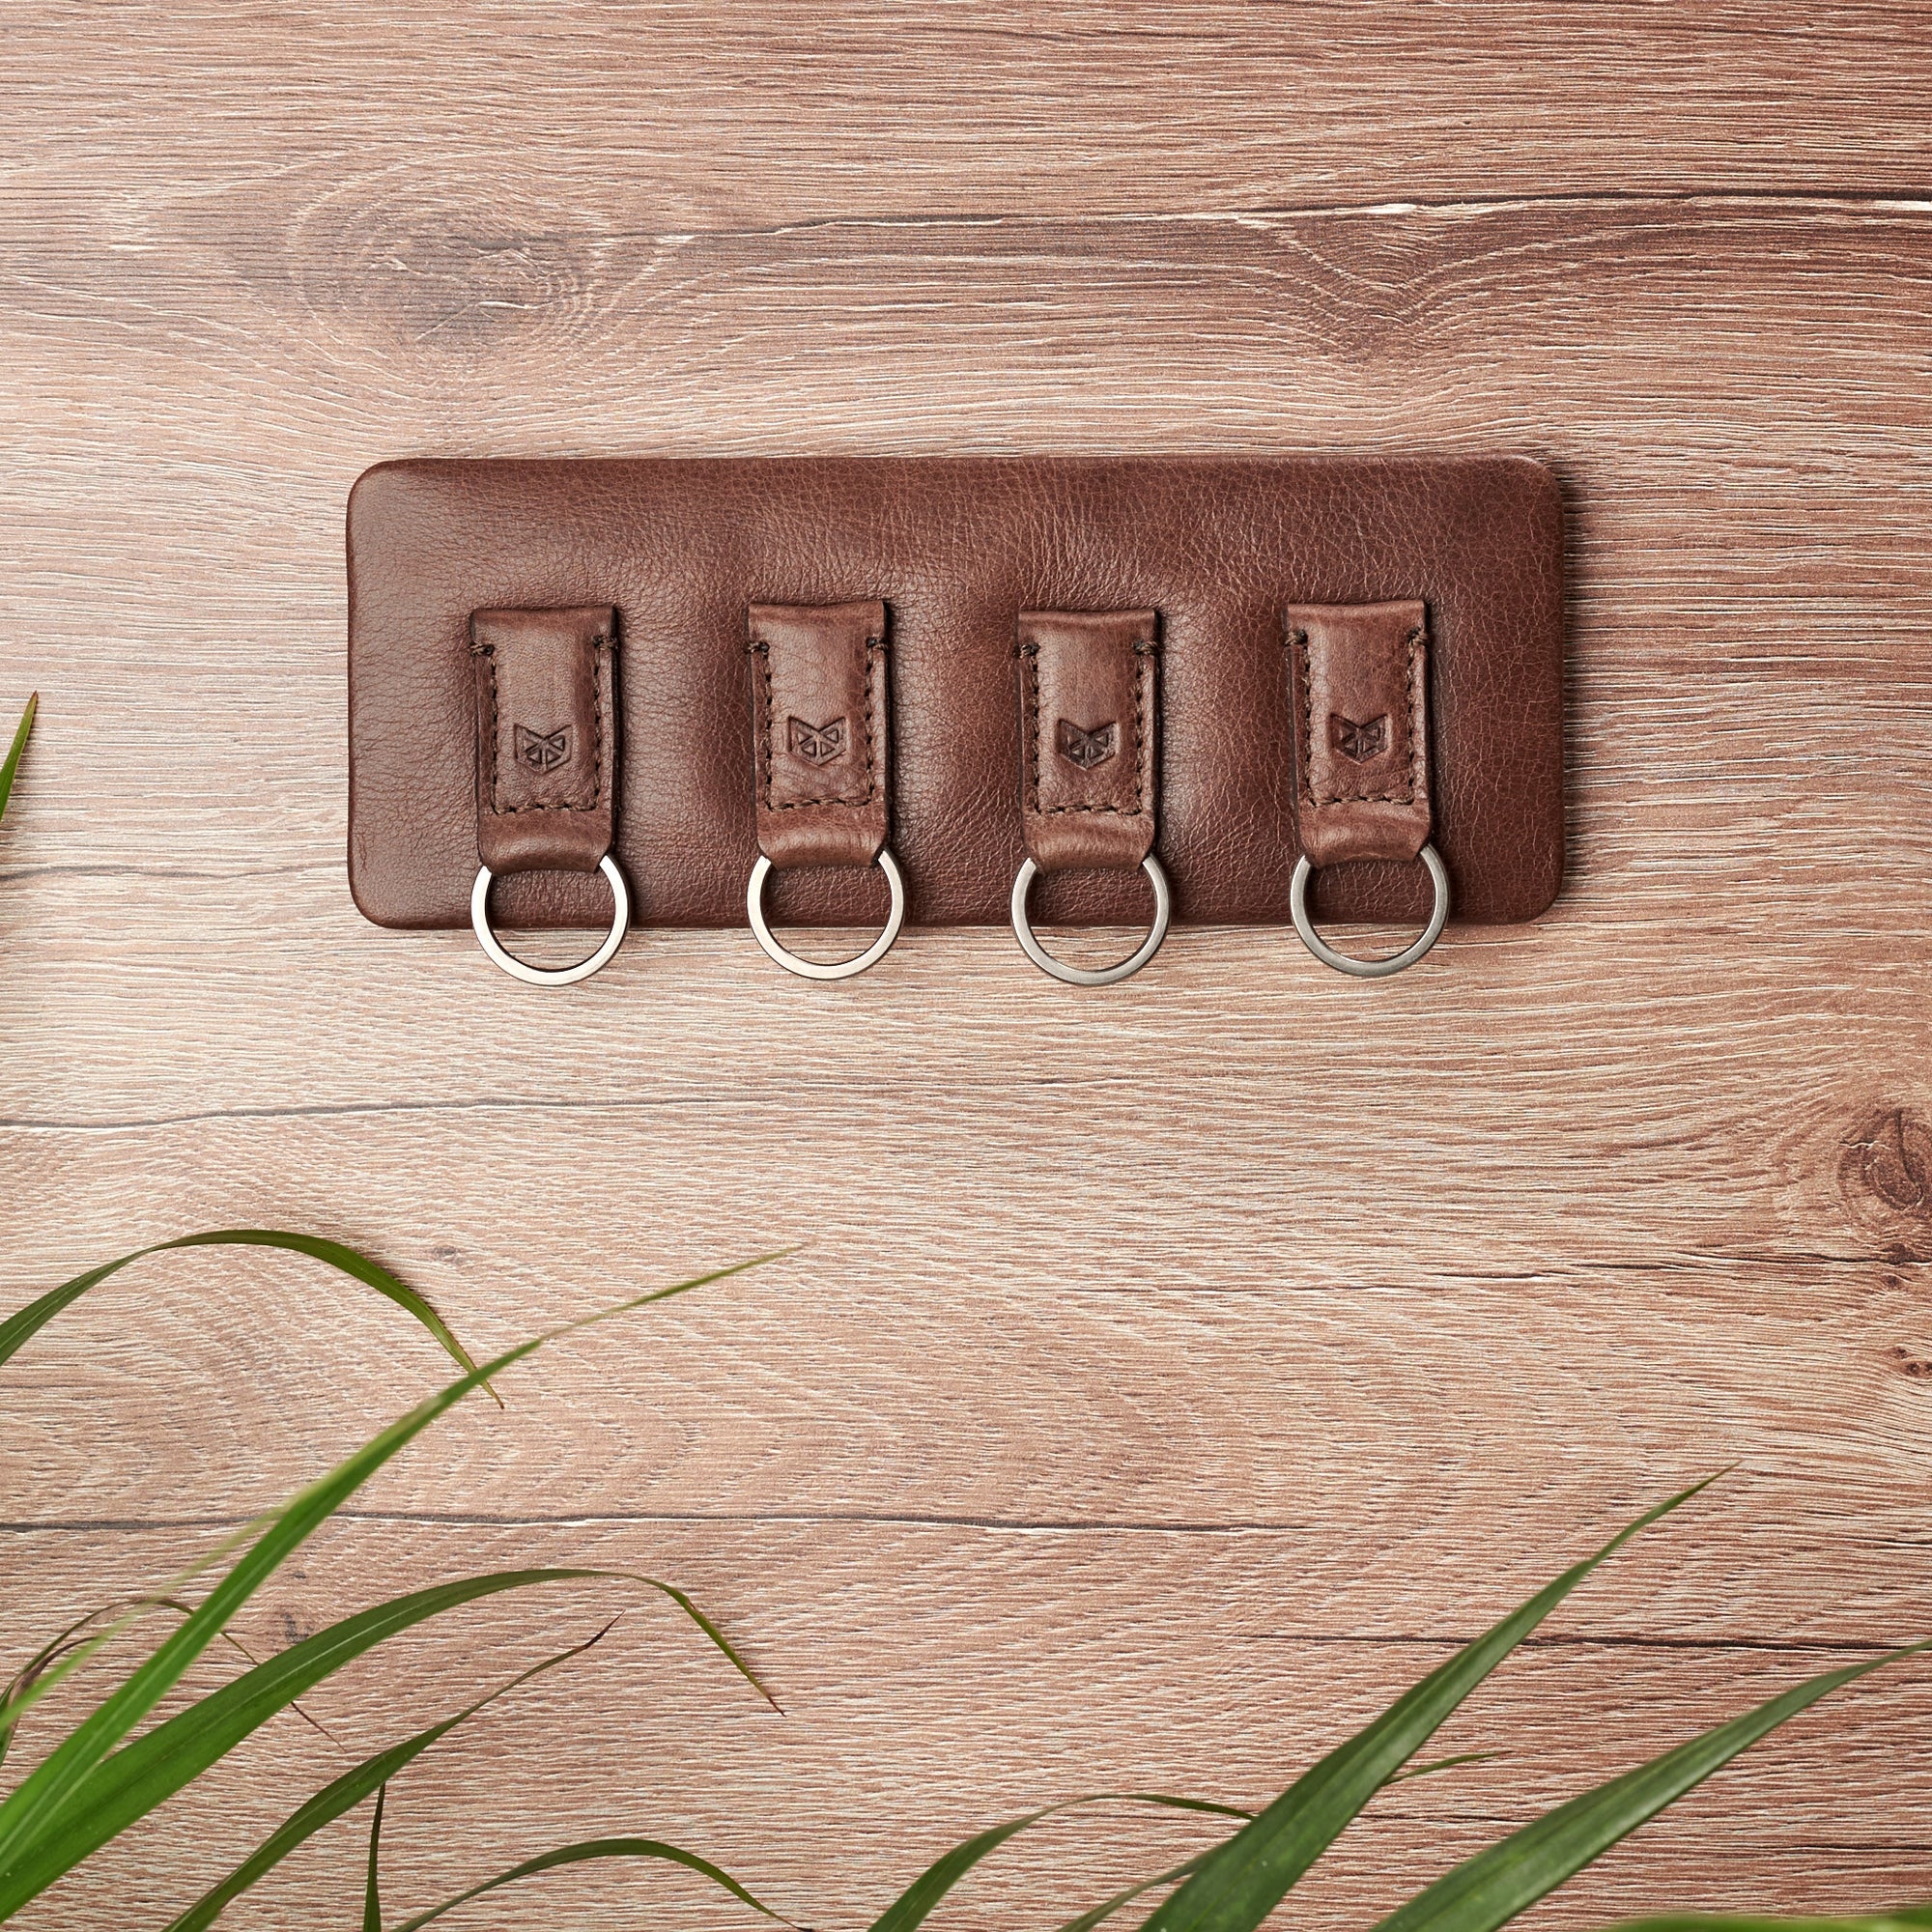  Magnetic key hanger organizer. Brown leather magnetic key holder for wall decor. Entryway organizer decor. Home decoration. Keys organizer